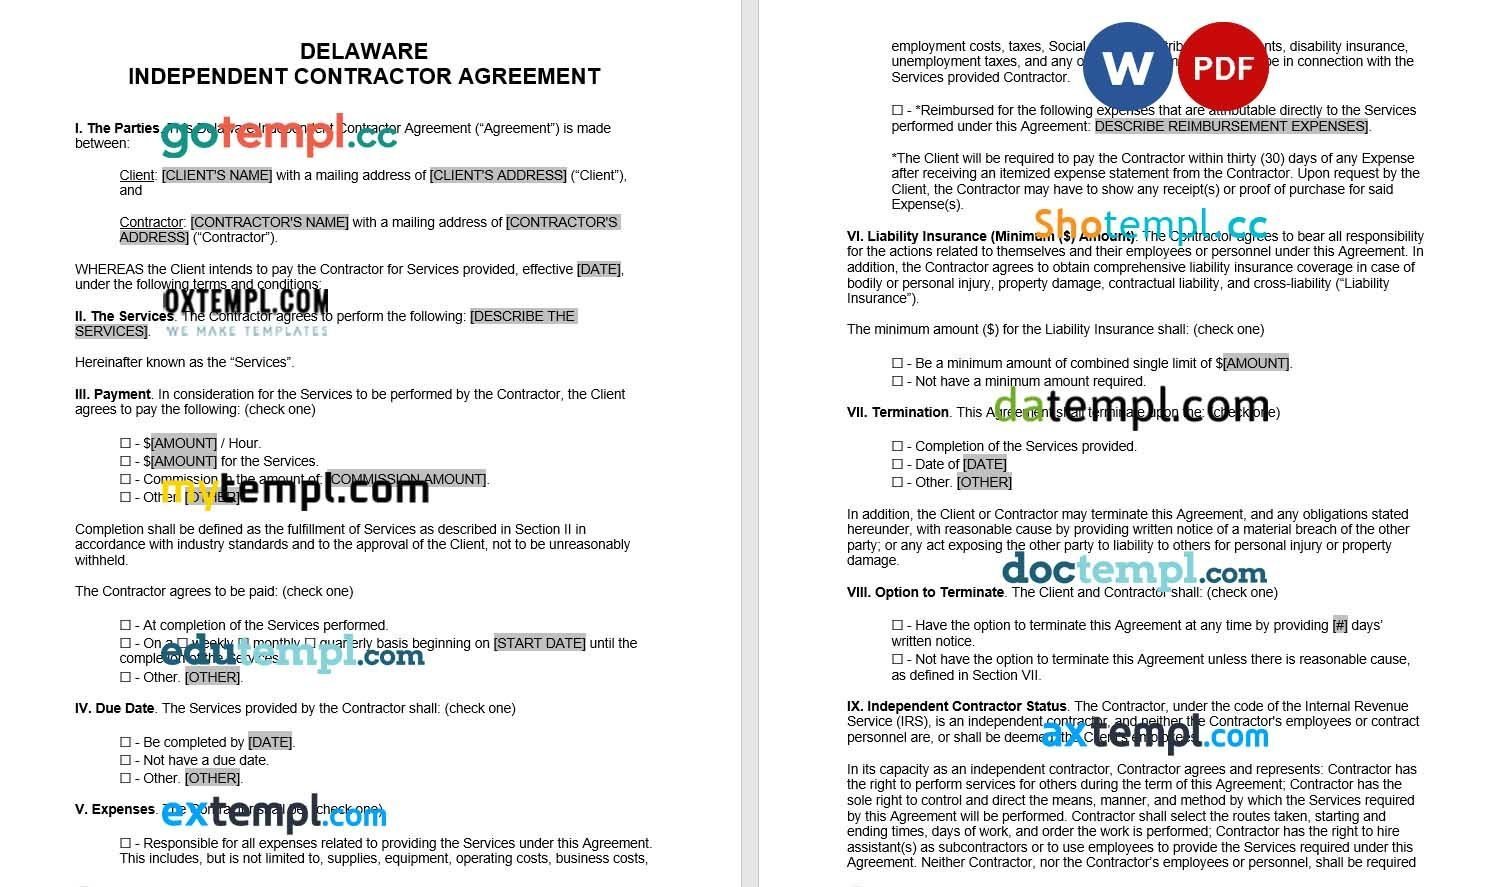 Delaware Independent Contractor Agreement Word example, fully editable